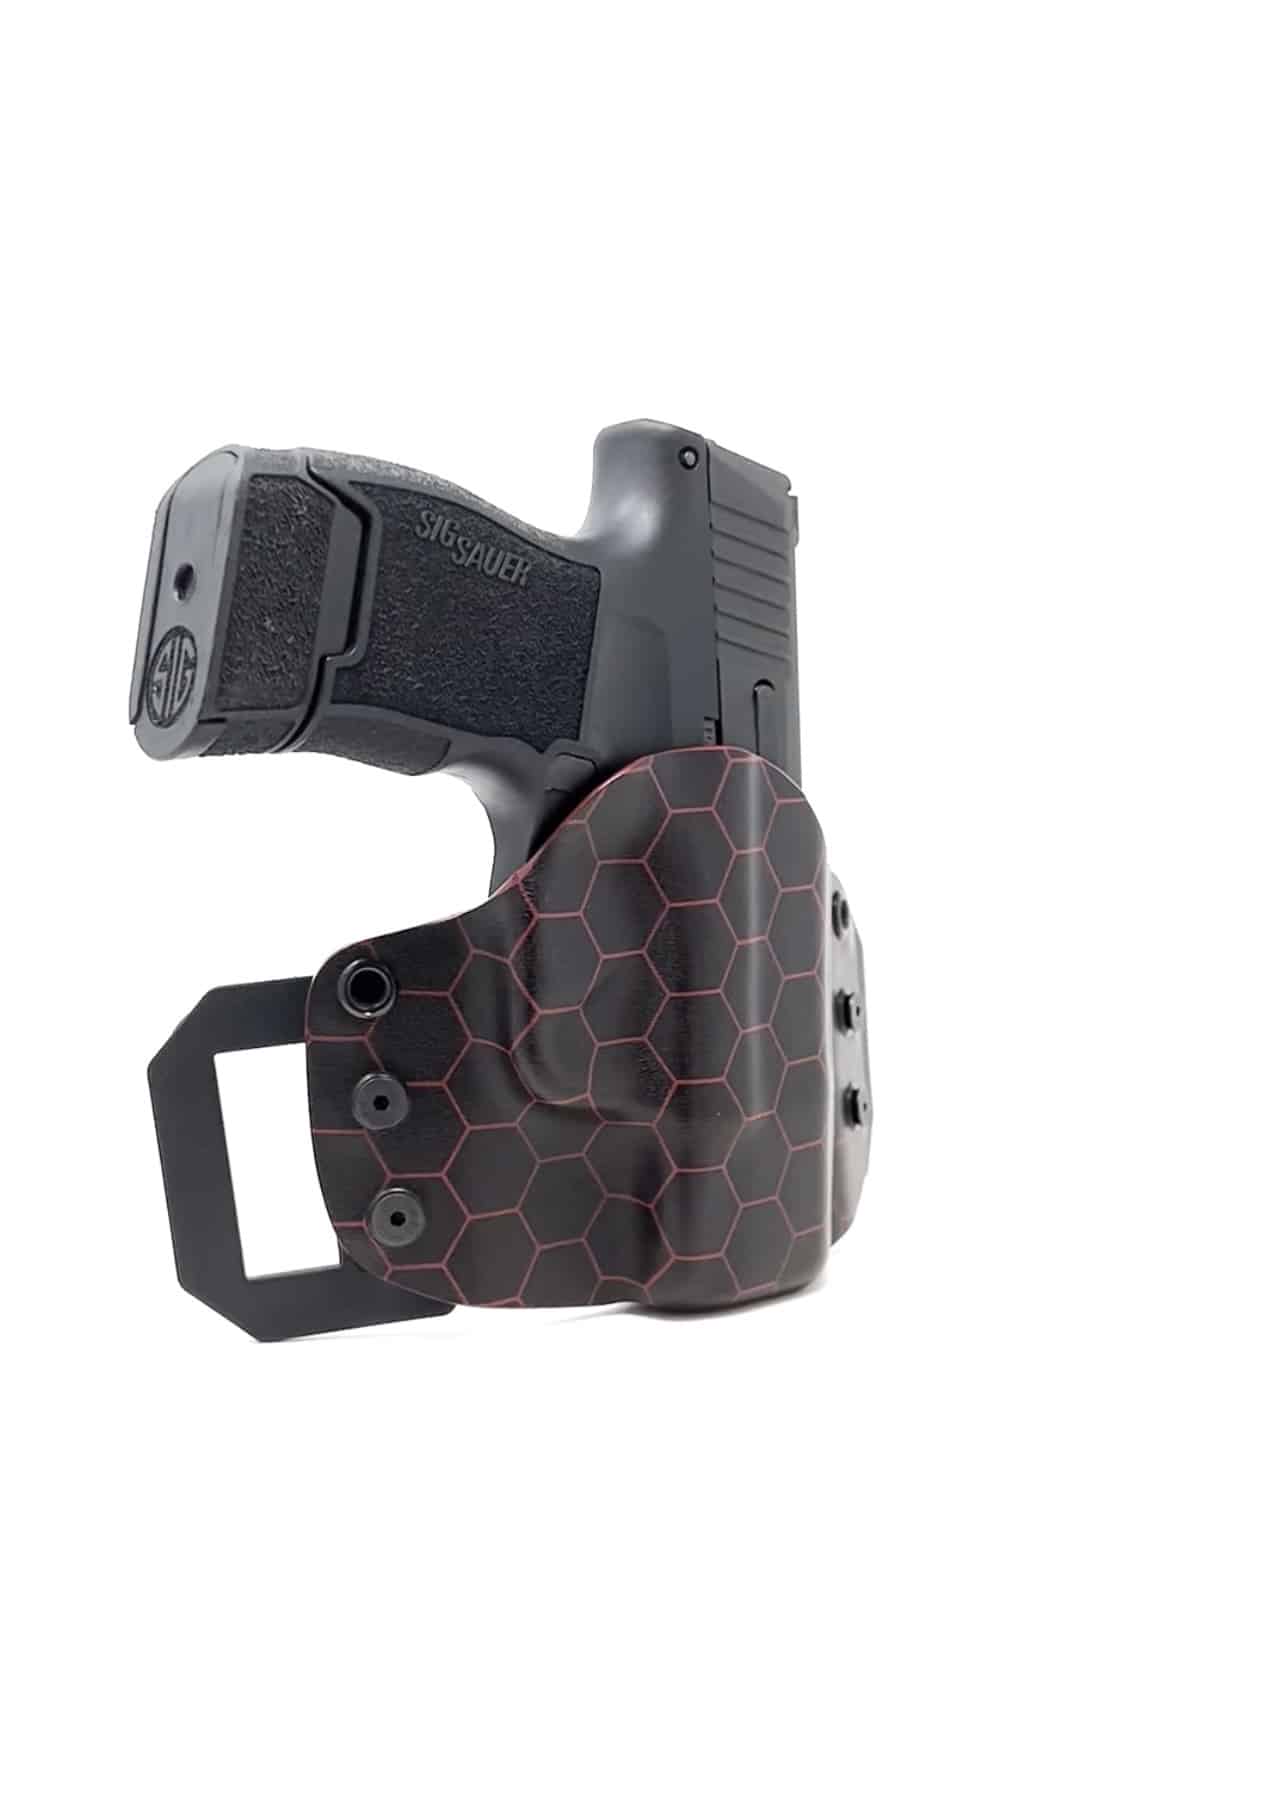 Smith & Wesson OWB Kydex Holster Holster for Ruger Small Frame S&W 